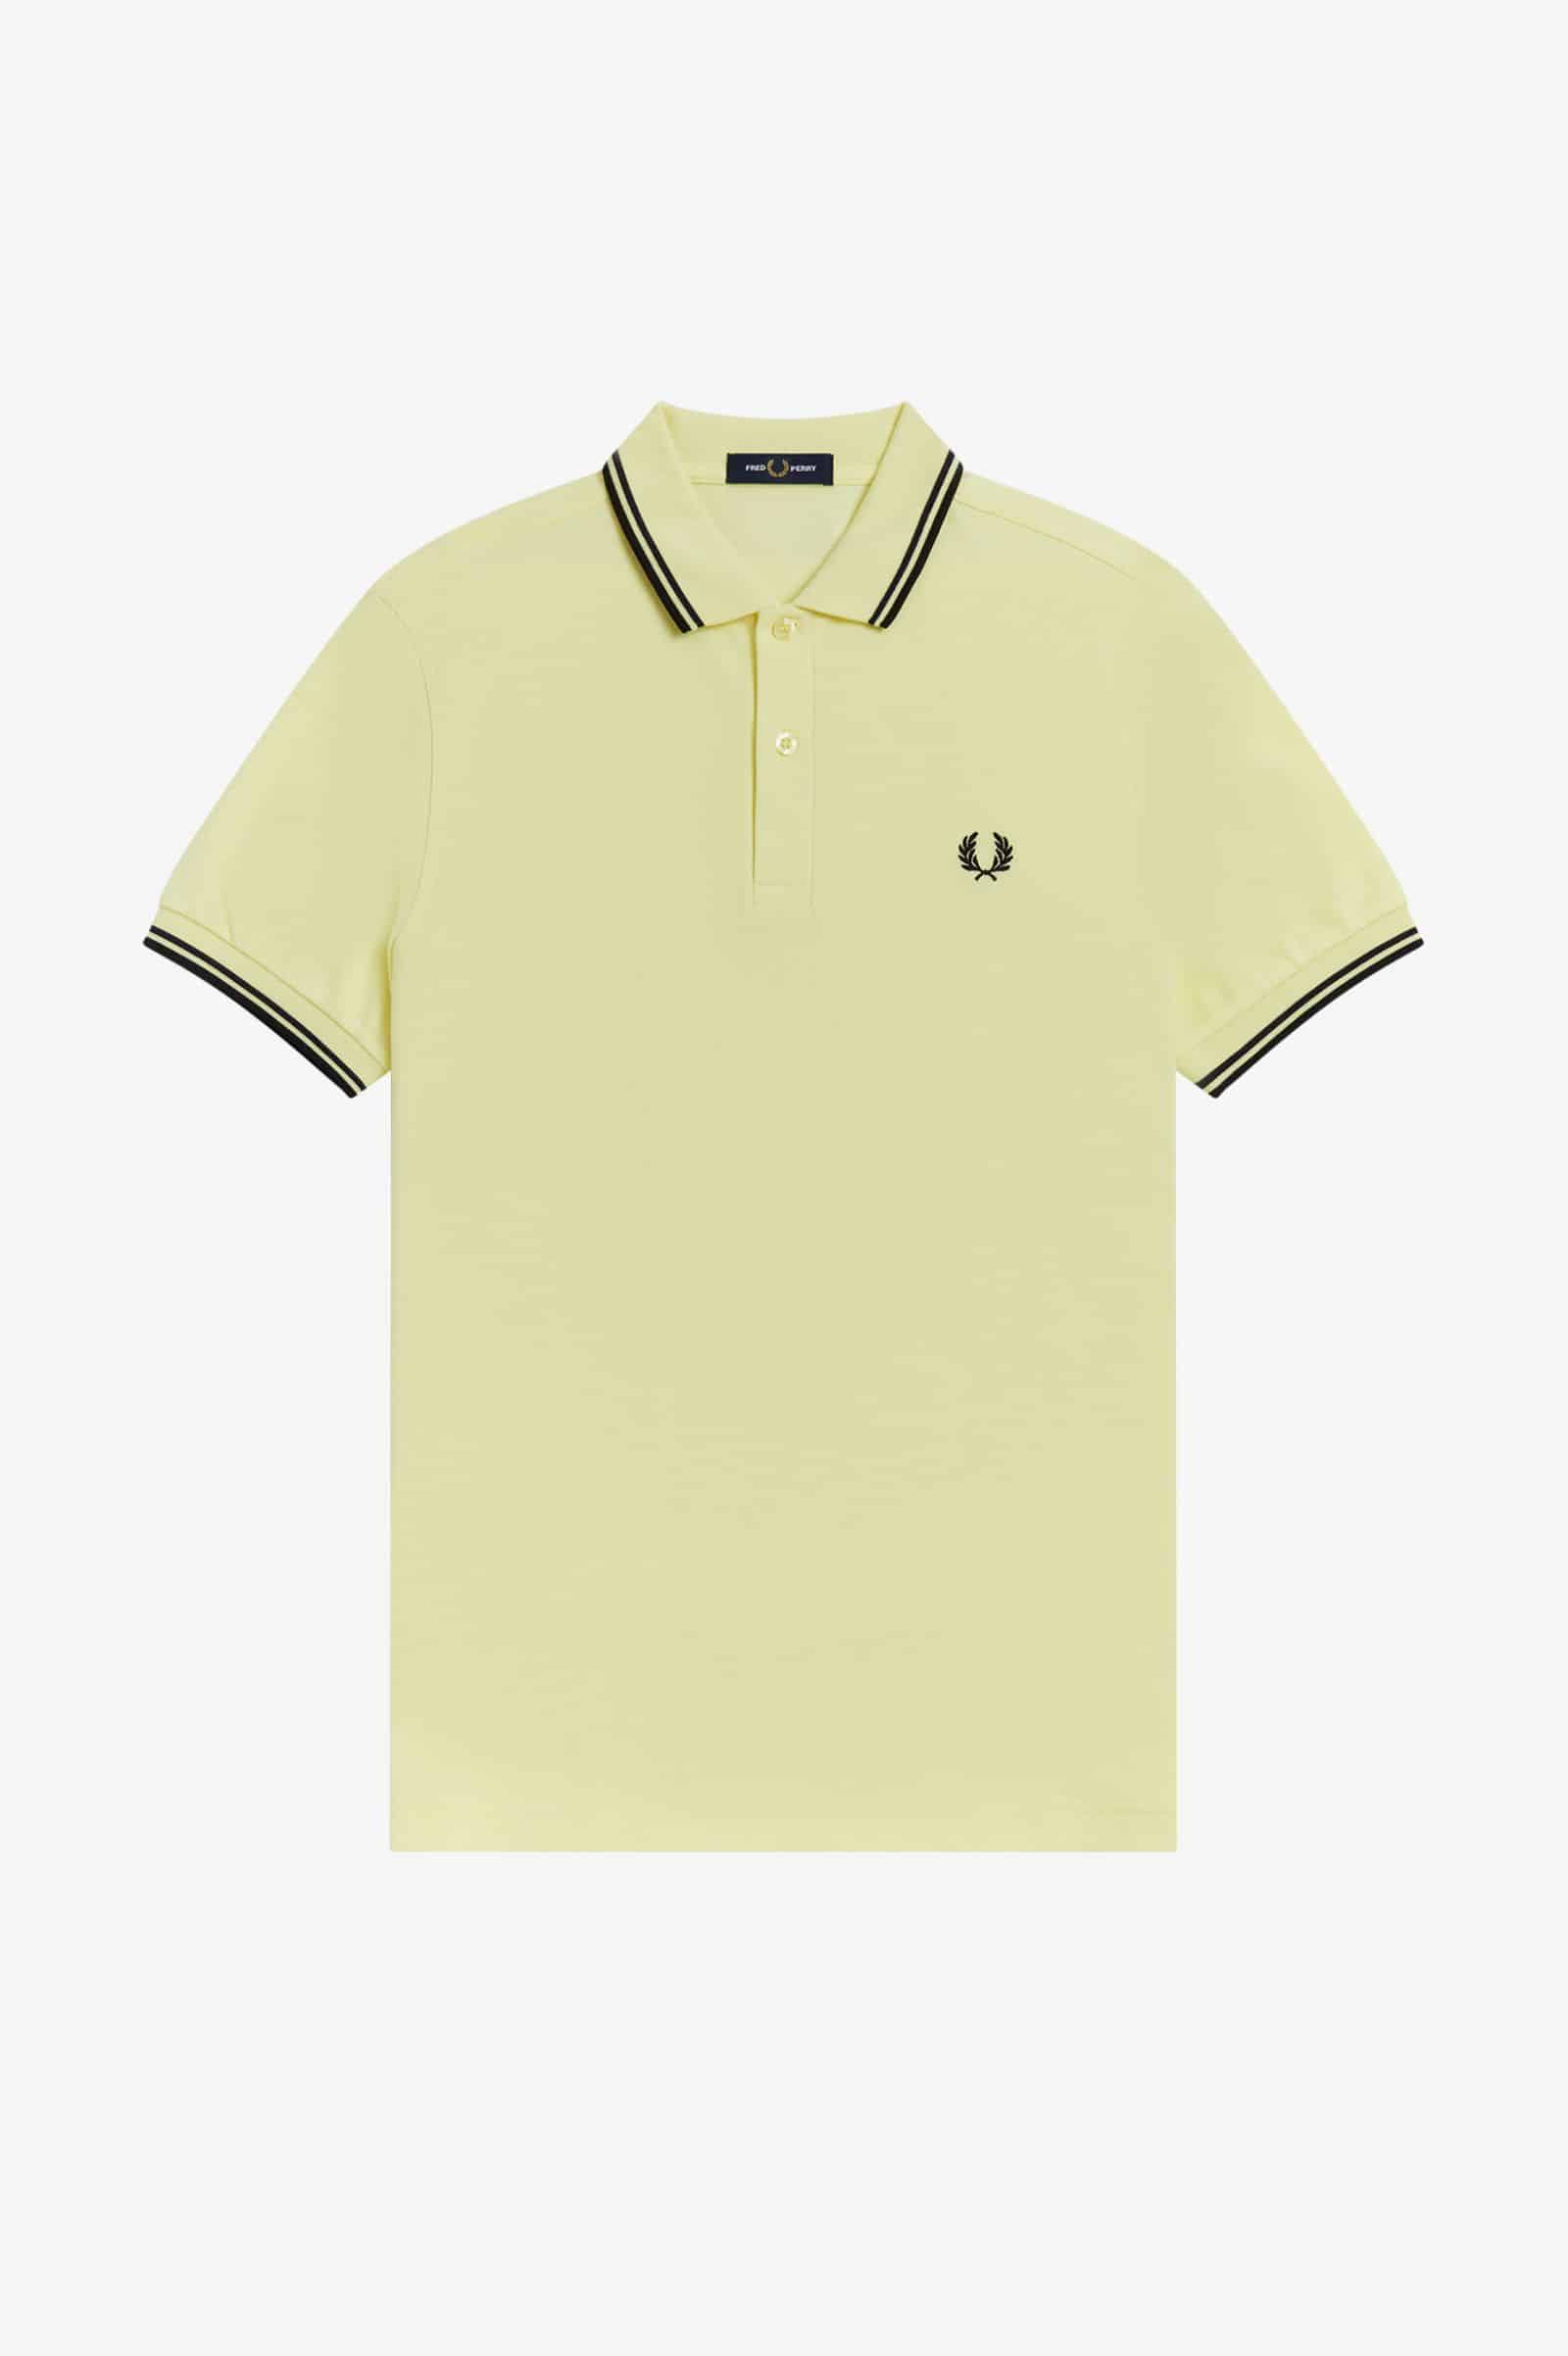 Fred Perry Twin Tipped T-Shirt Wax Yellow